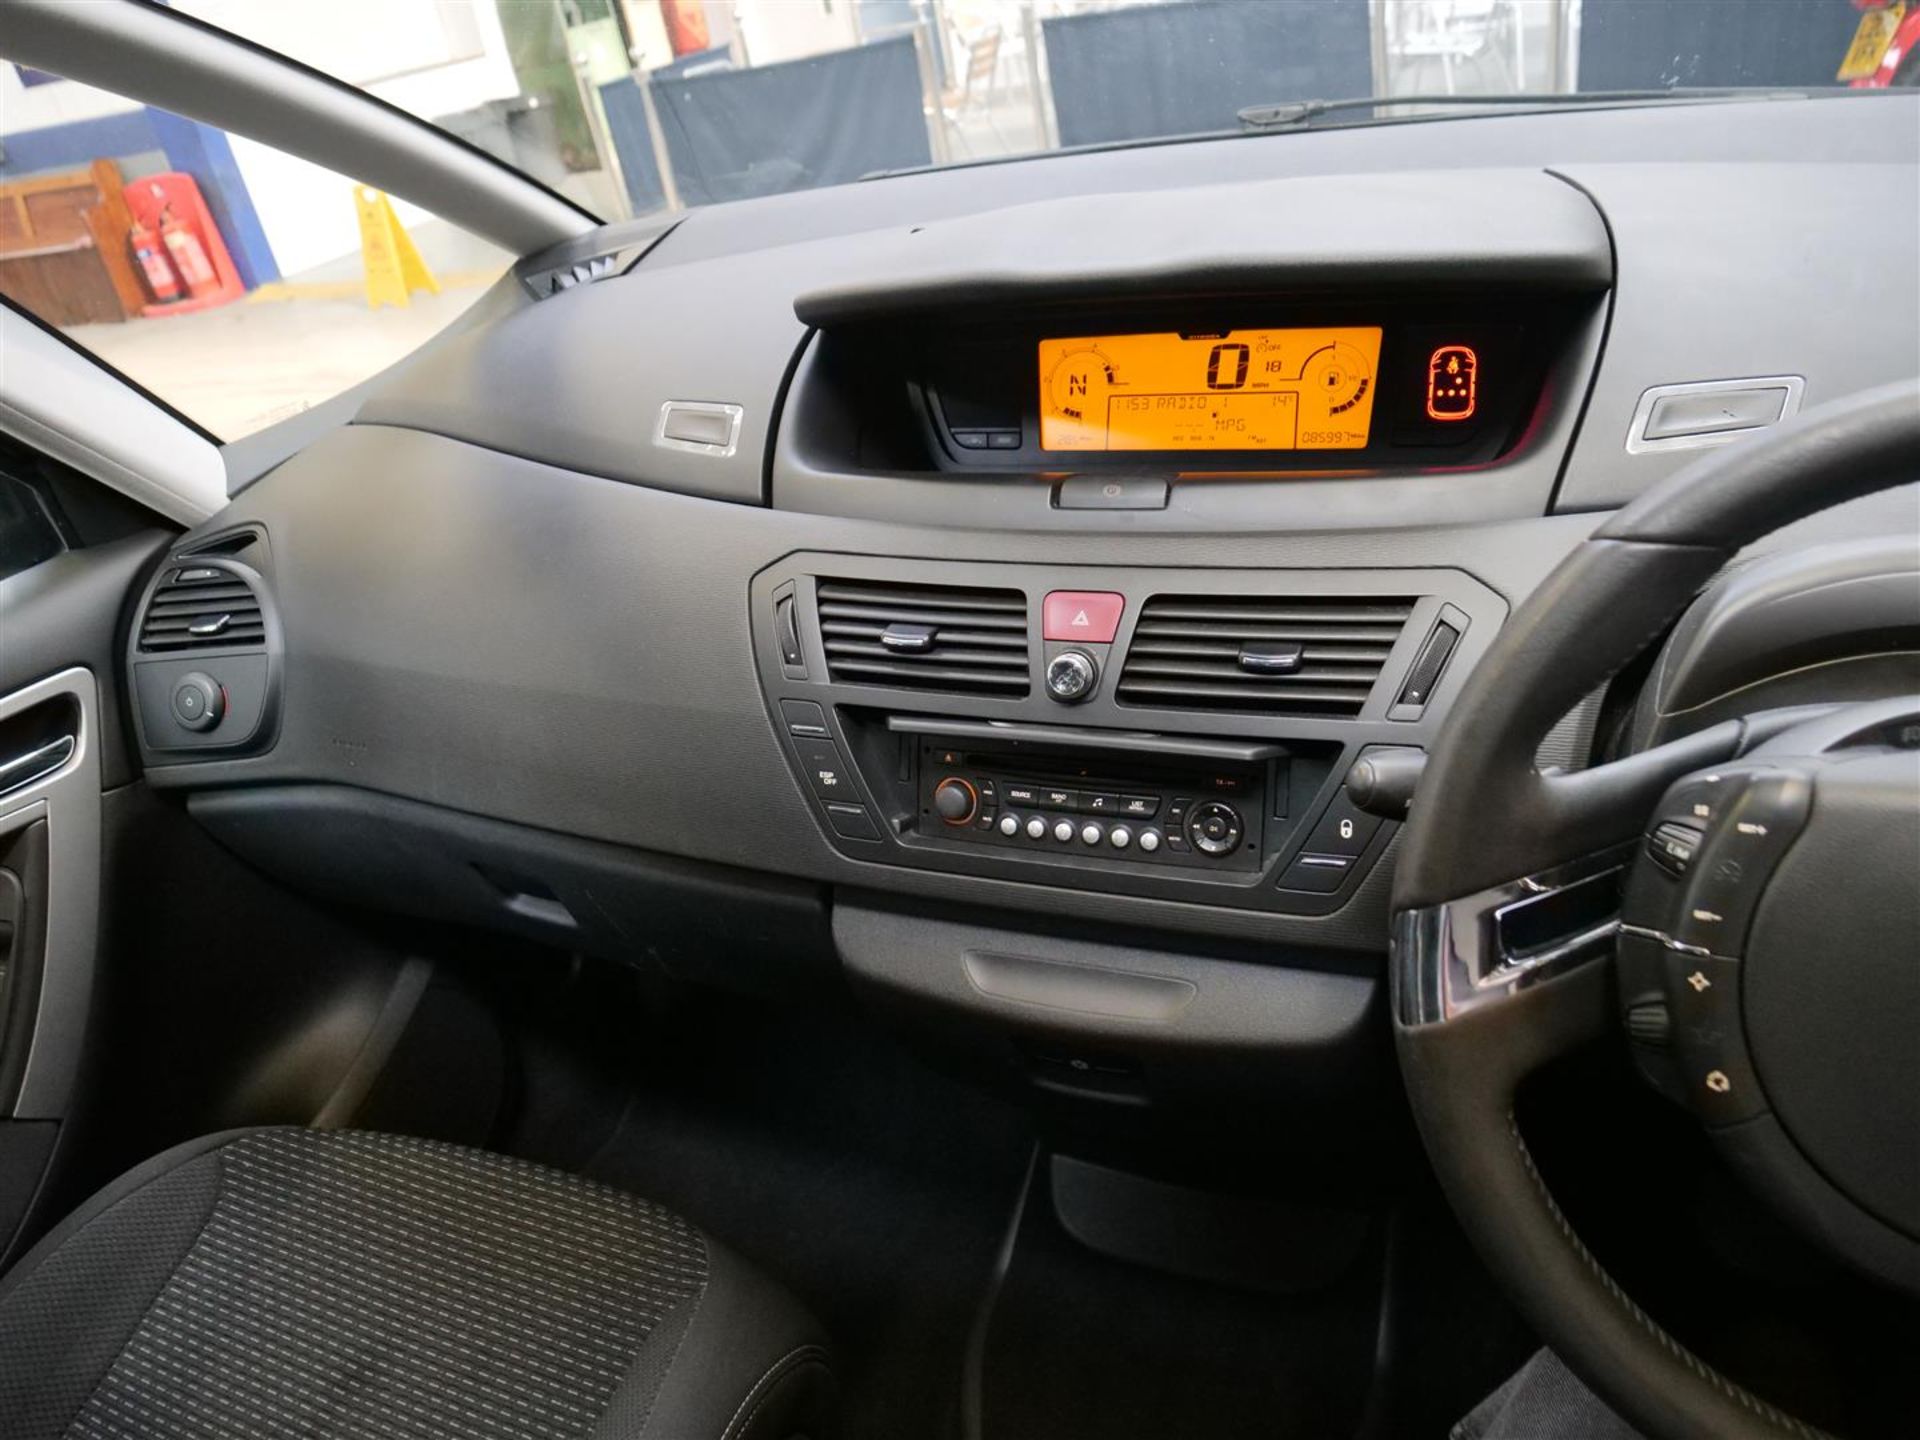 10 10 Citroen C4 Picasso VTR+ HDI - Image 21 of 41